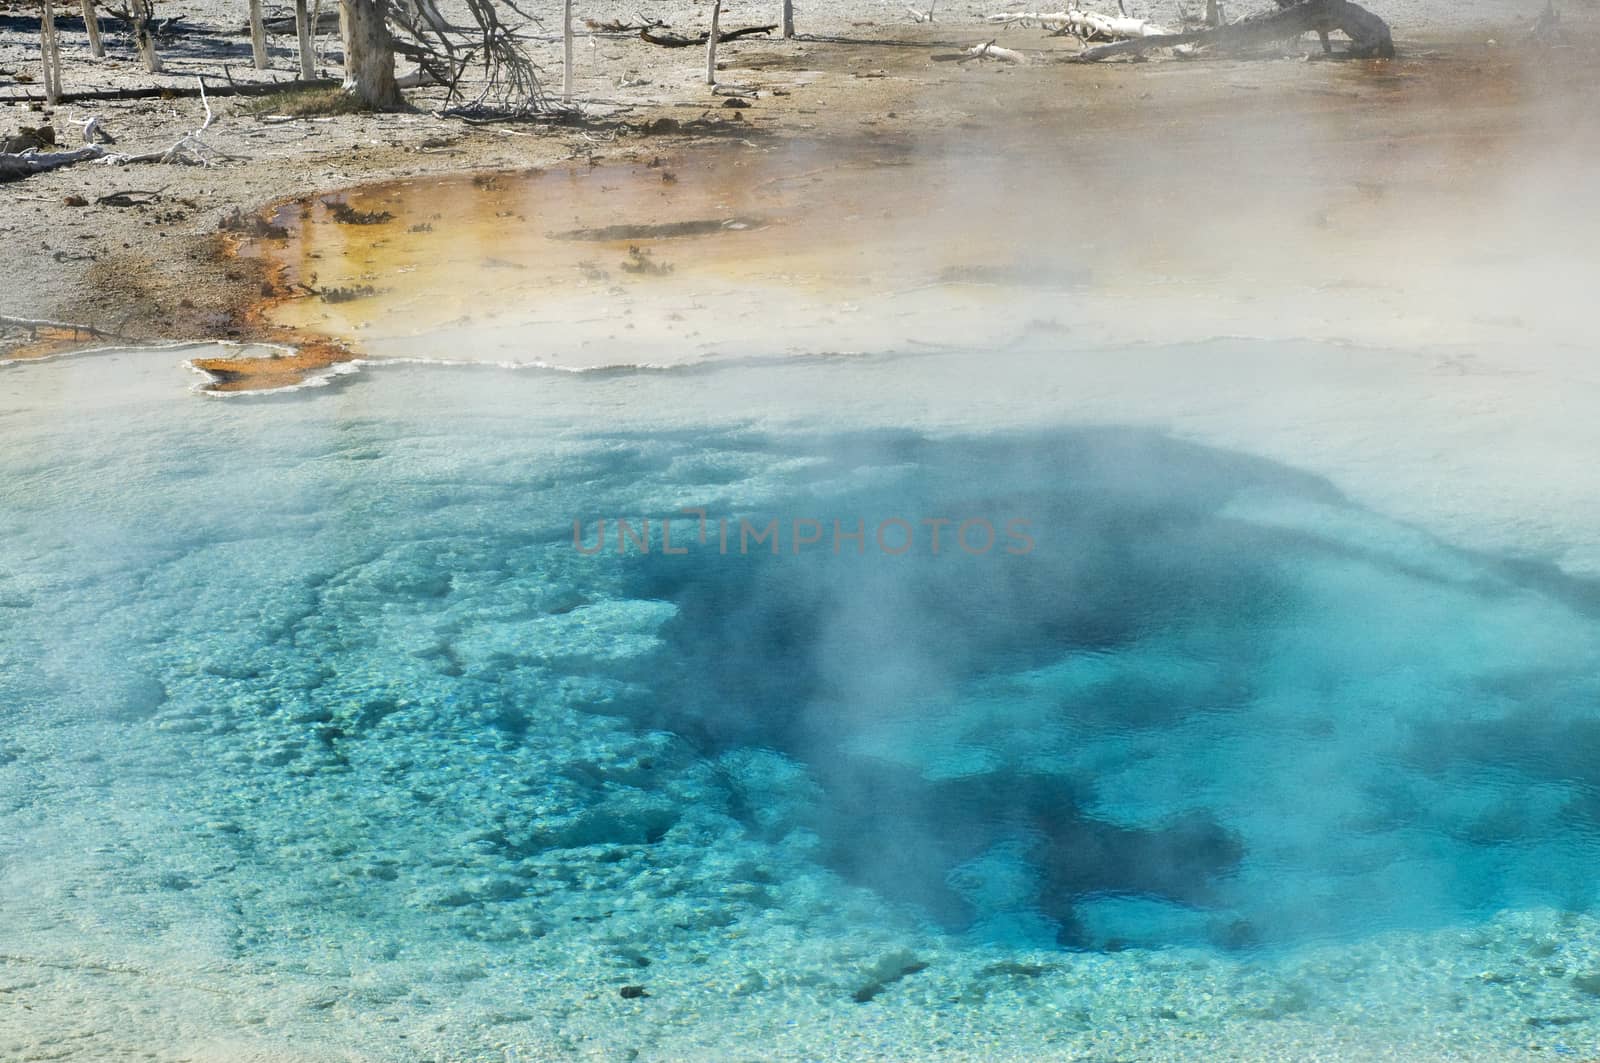 Fumarole by Fountain Paint Pots of Yellowstone National Park, Wy by Njean